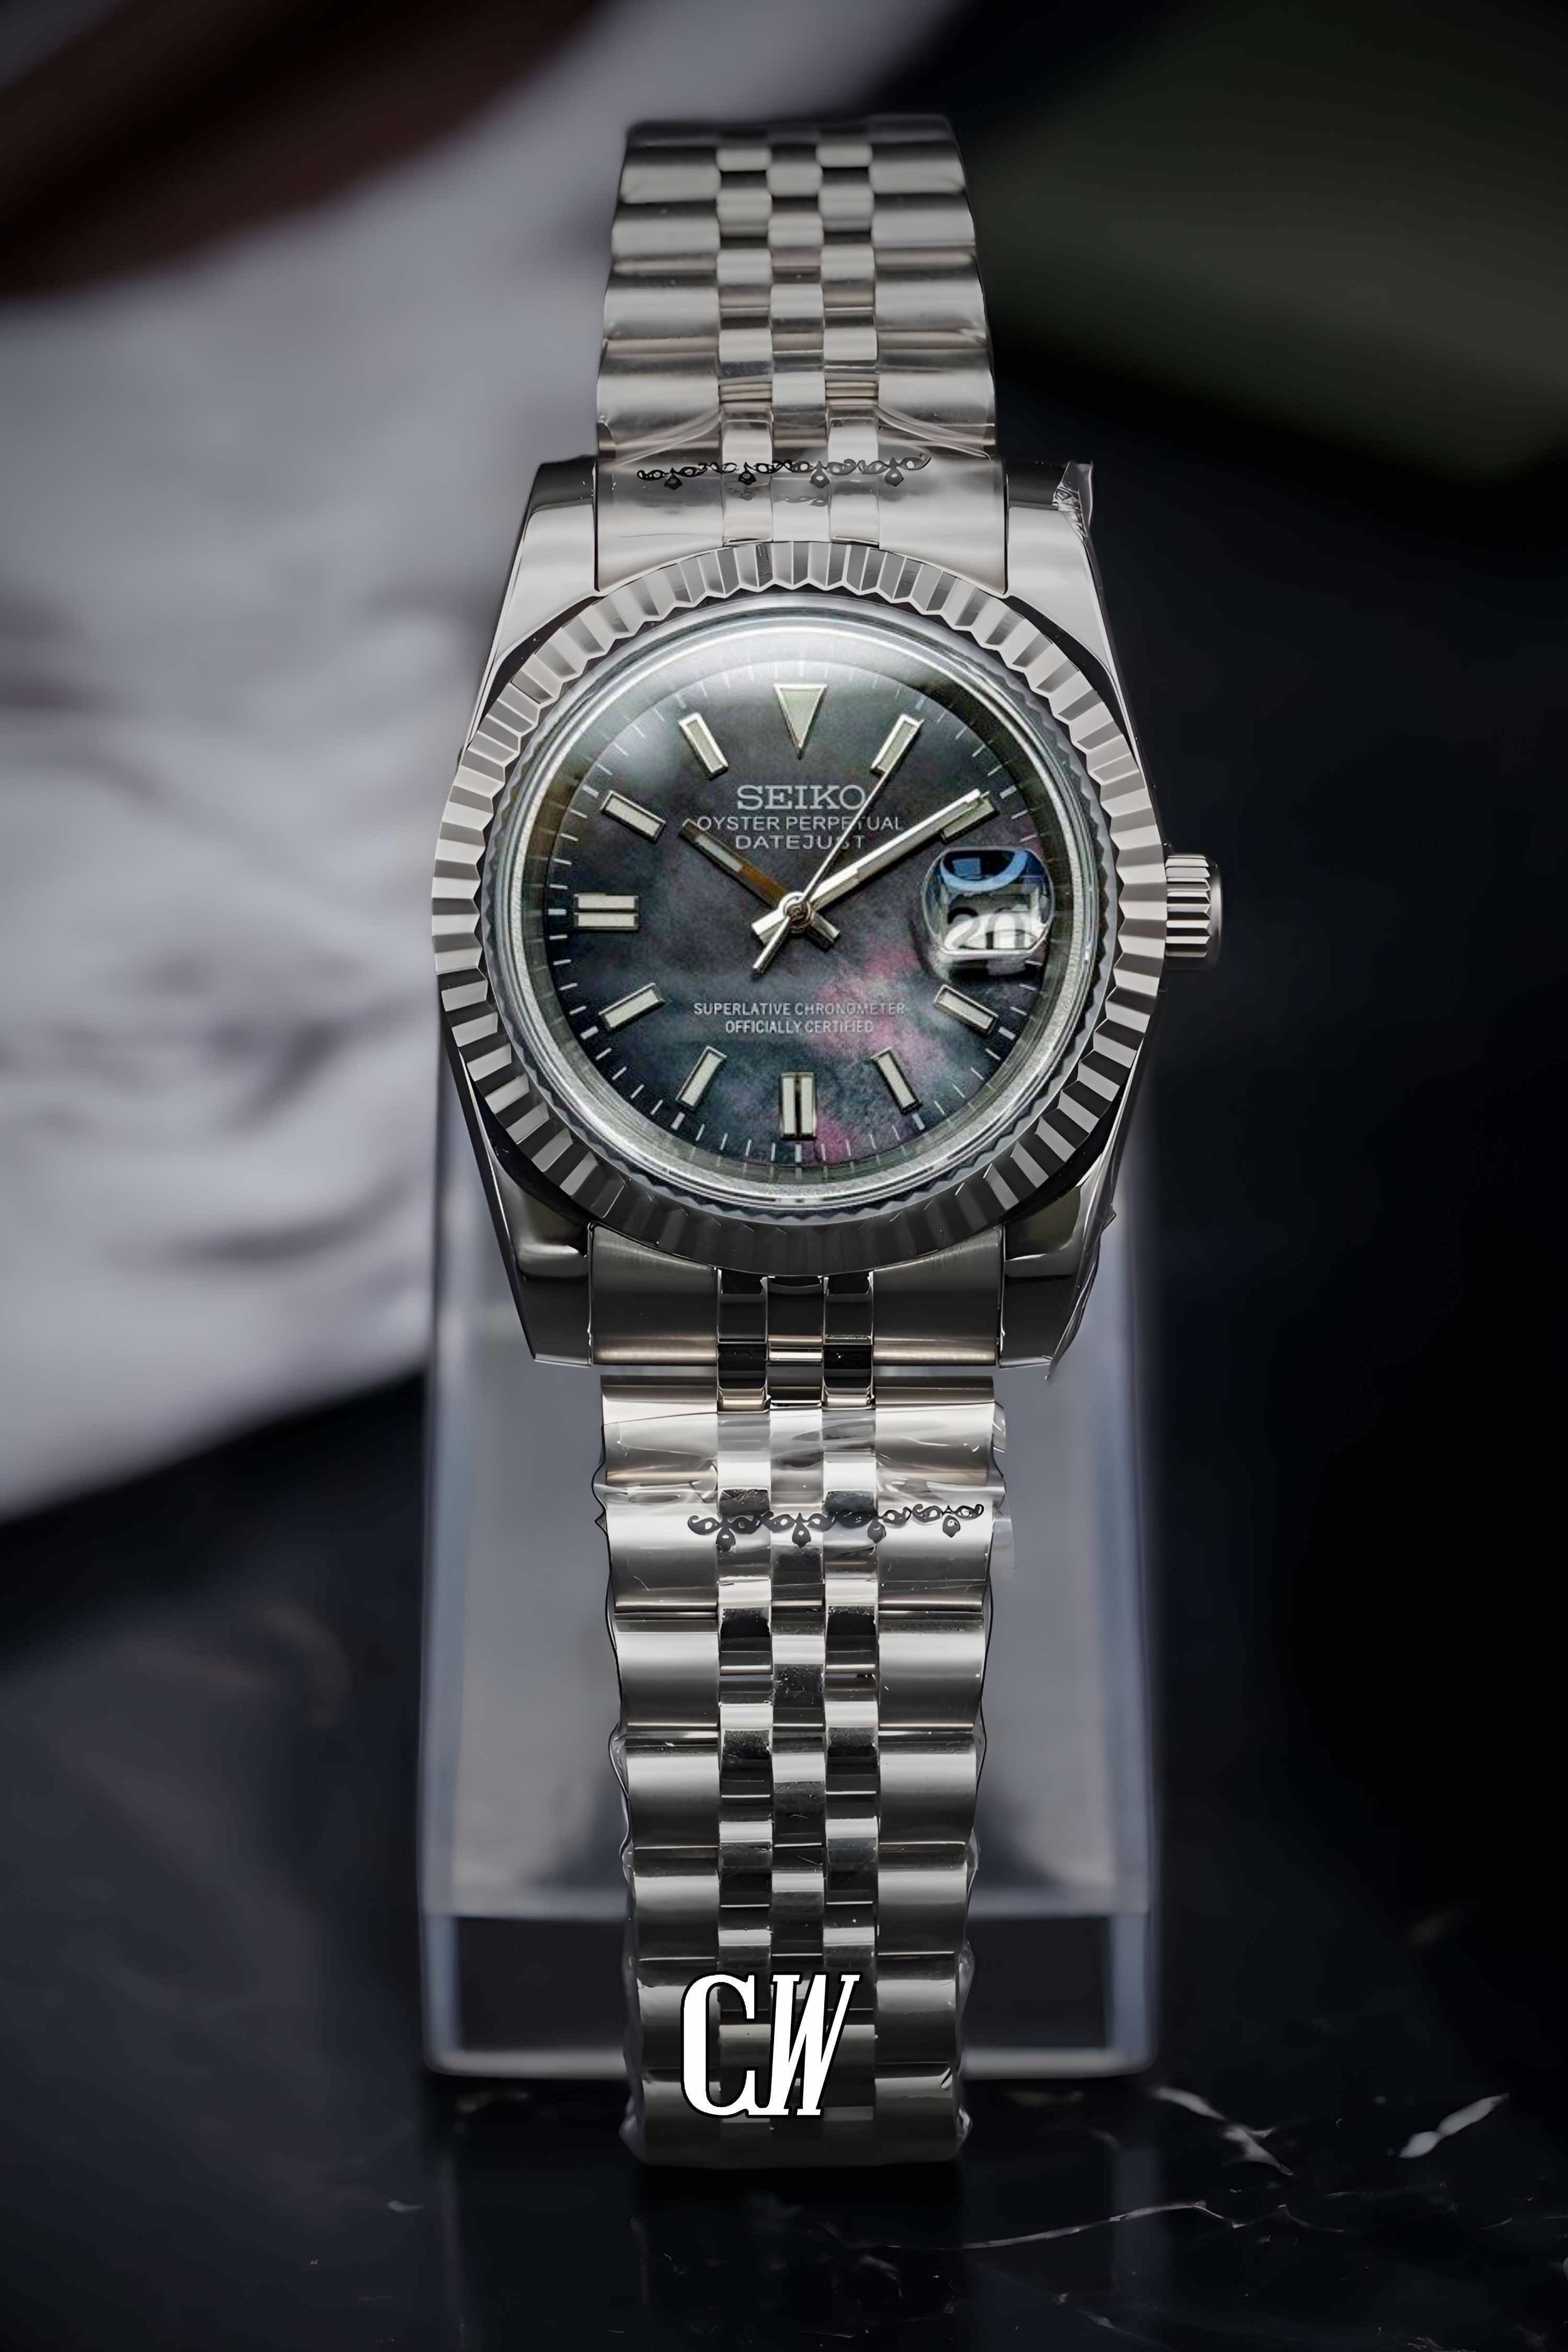 Seiko mod datejust pearl limited edition watch